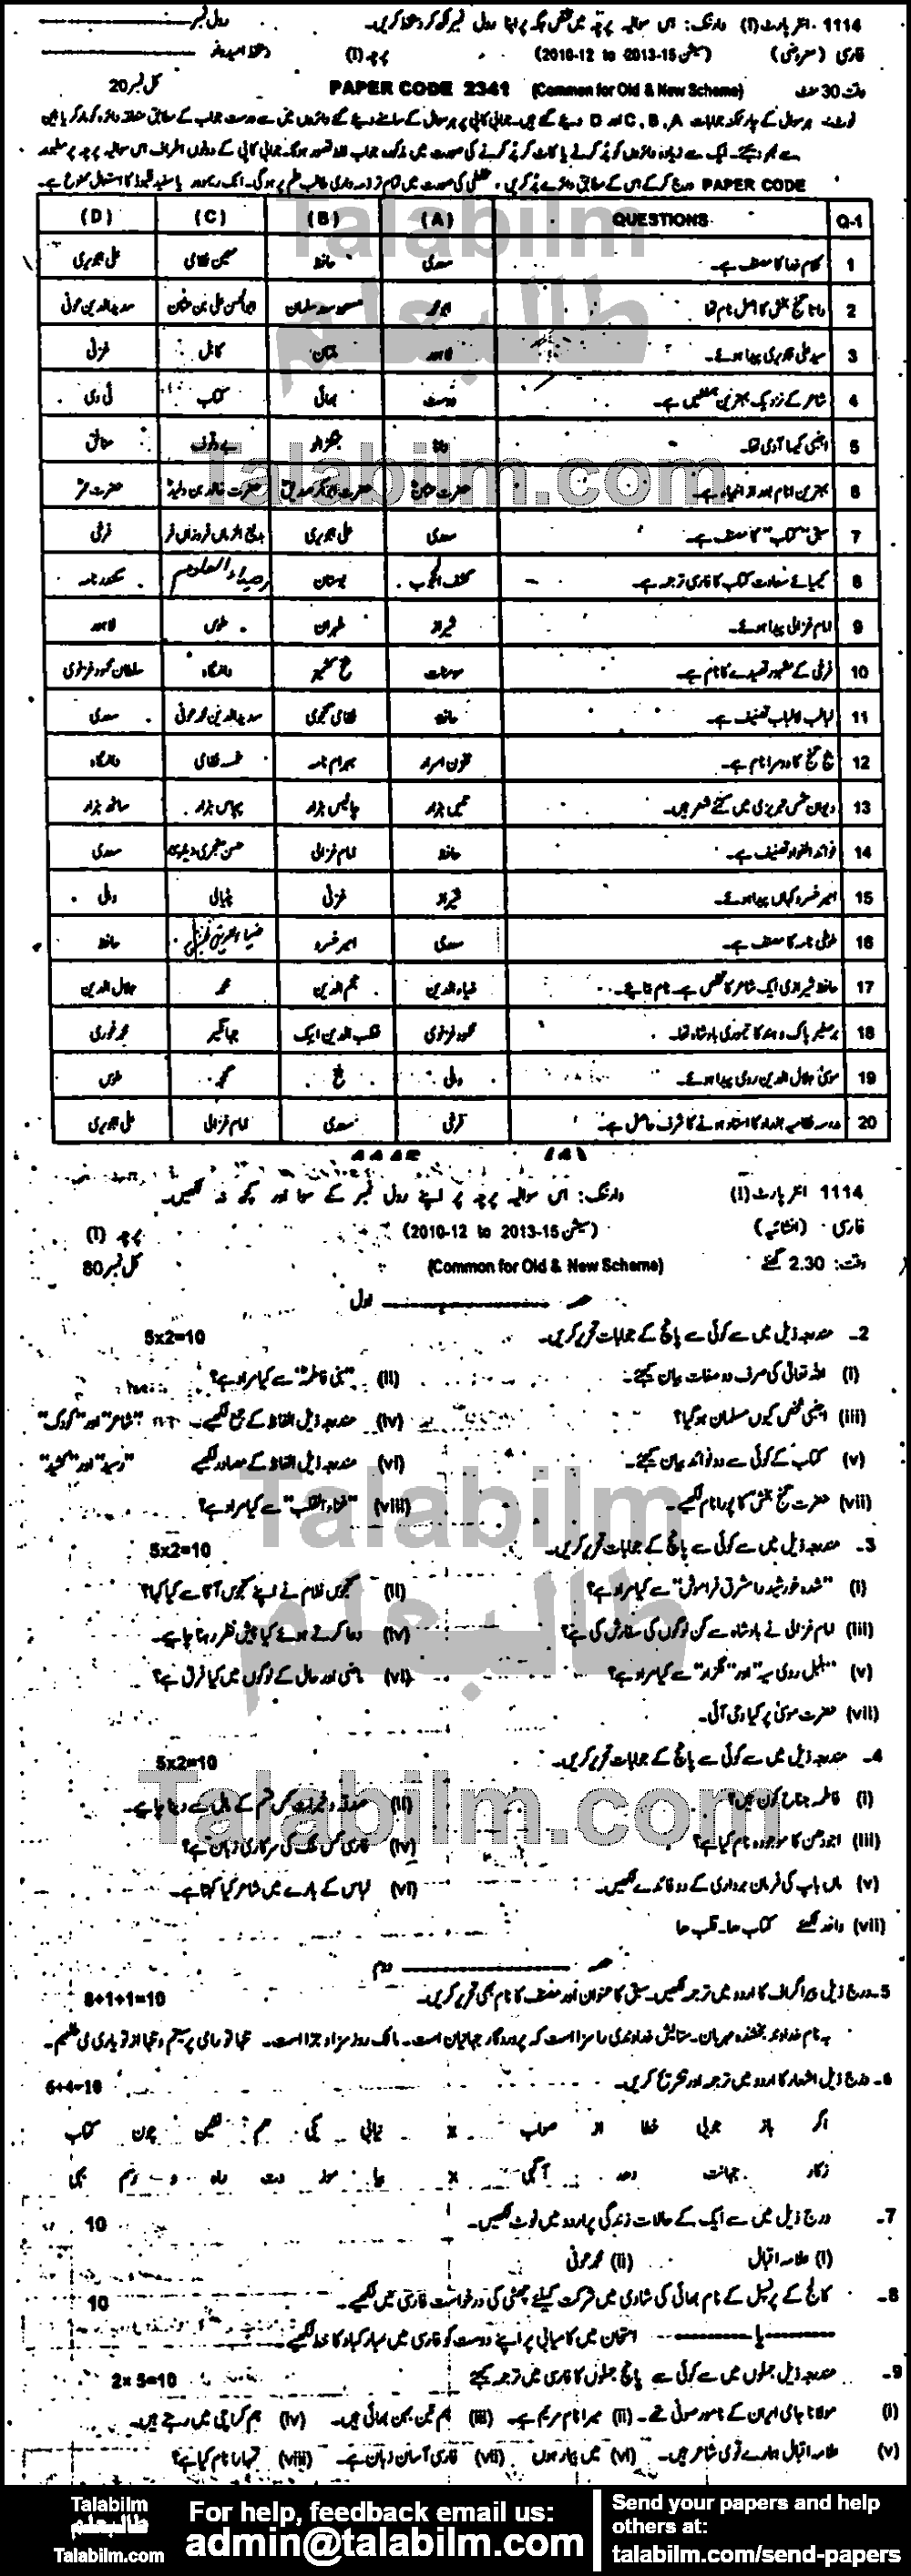 Persian 0 past paper for Group-I 2014